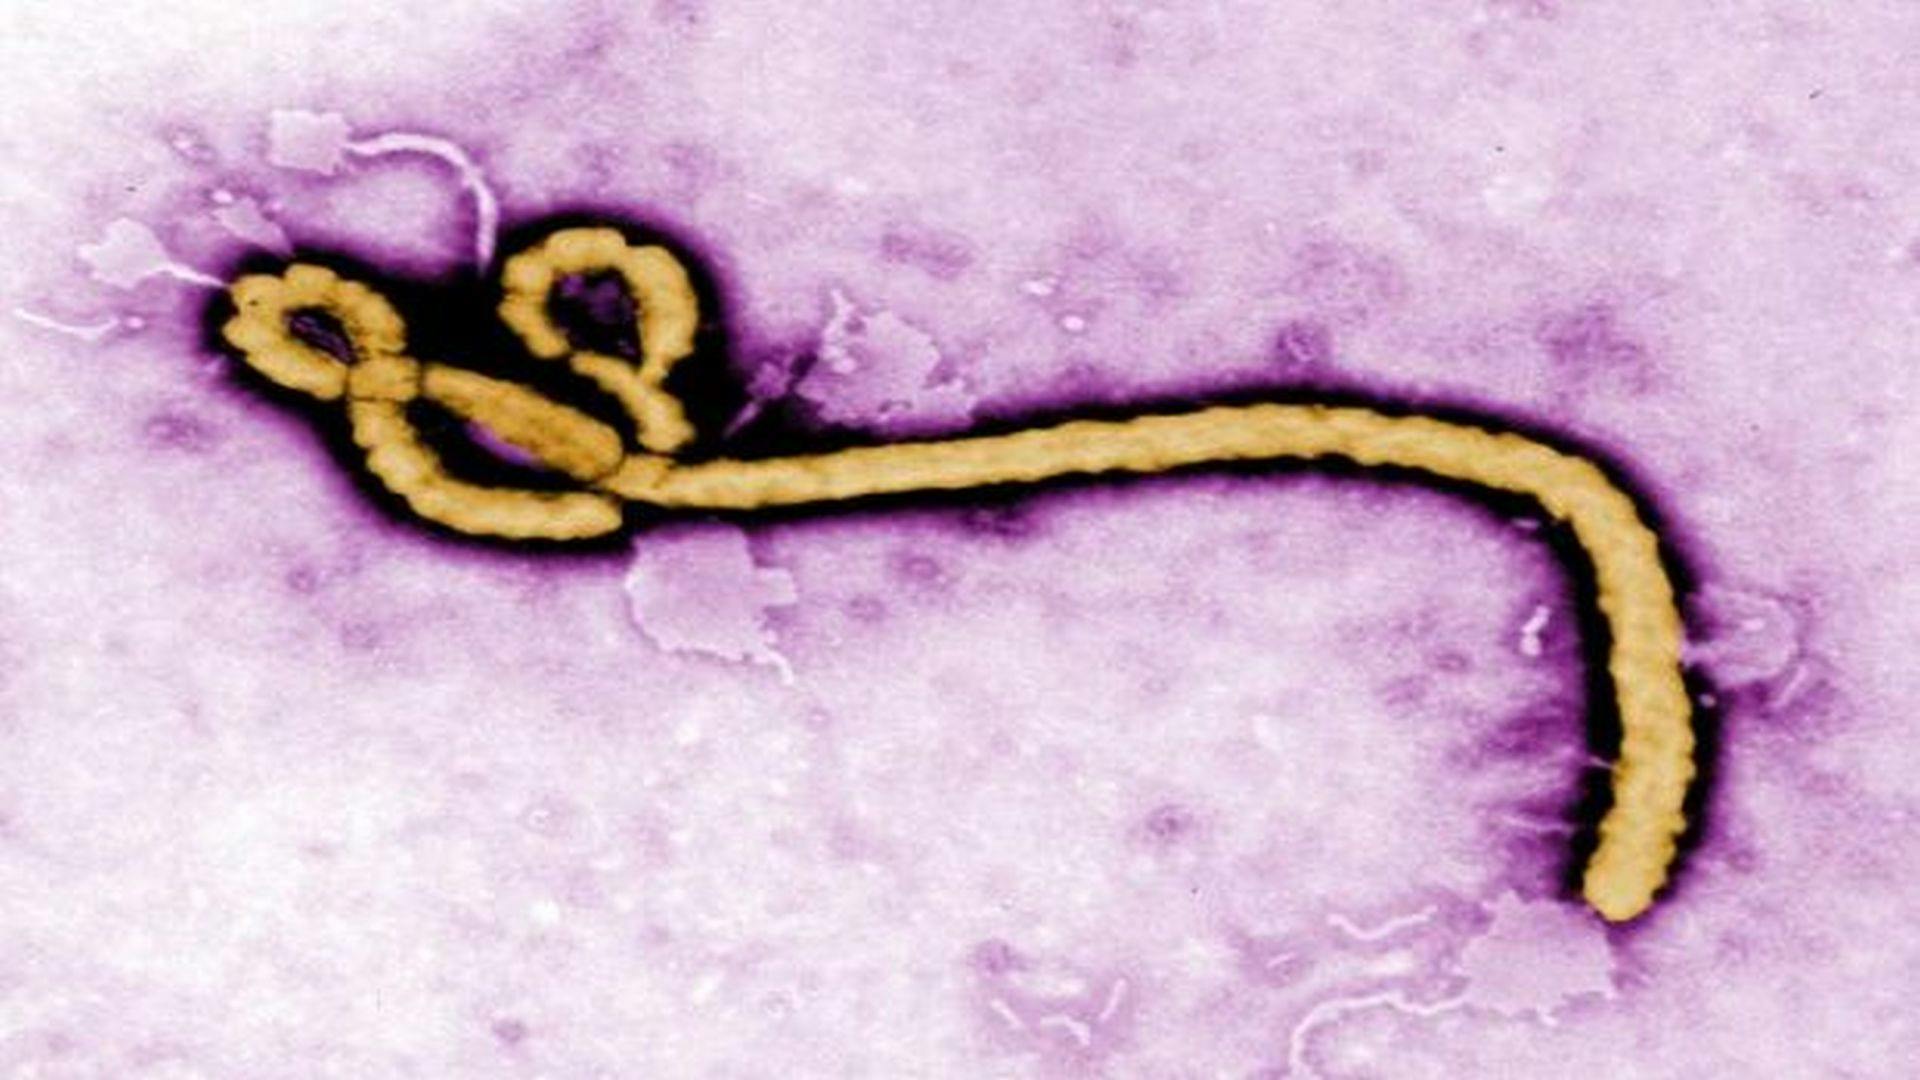 Ebola Detected in Semen of Survivors Two Years After Infection